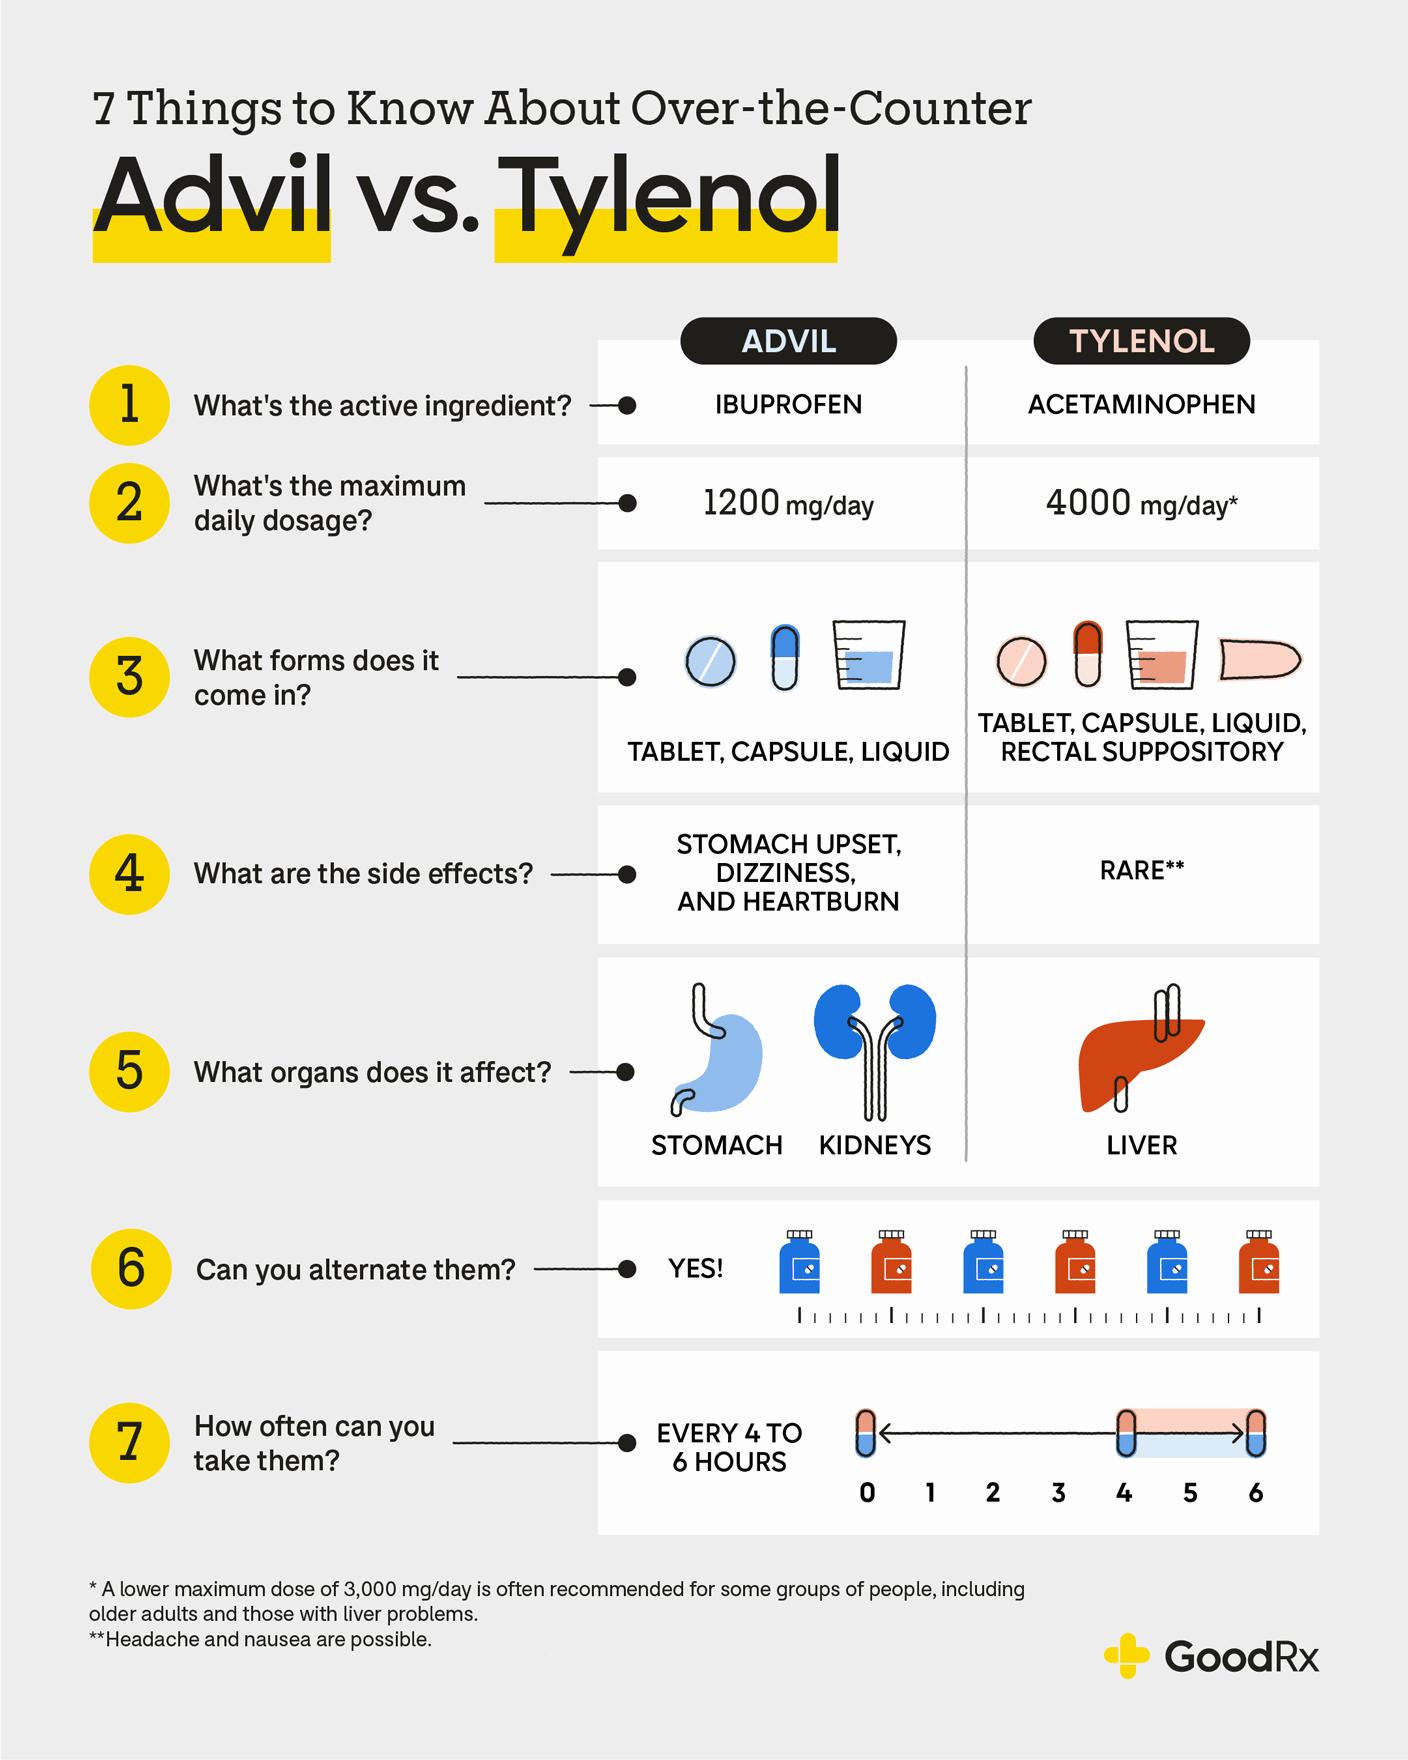 A comparison of the active ingredients, maximum daily dosage, forms, side effects, affected organs, and frequency of administration of Advil and Tylenol.